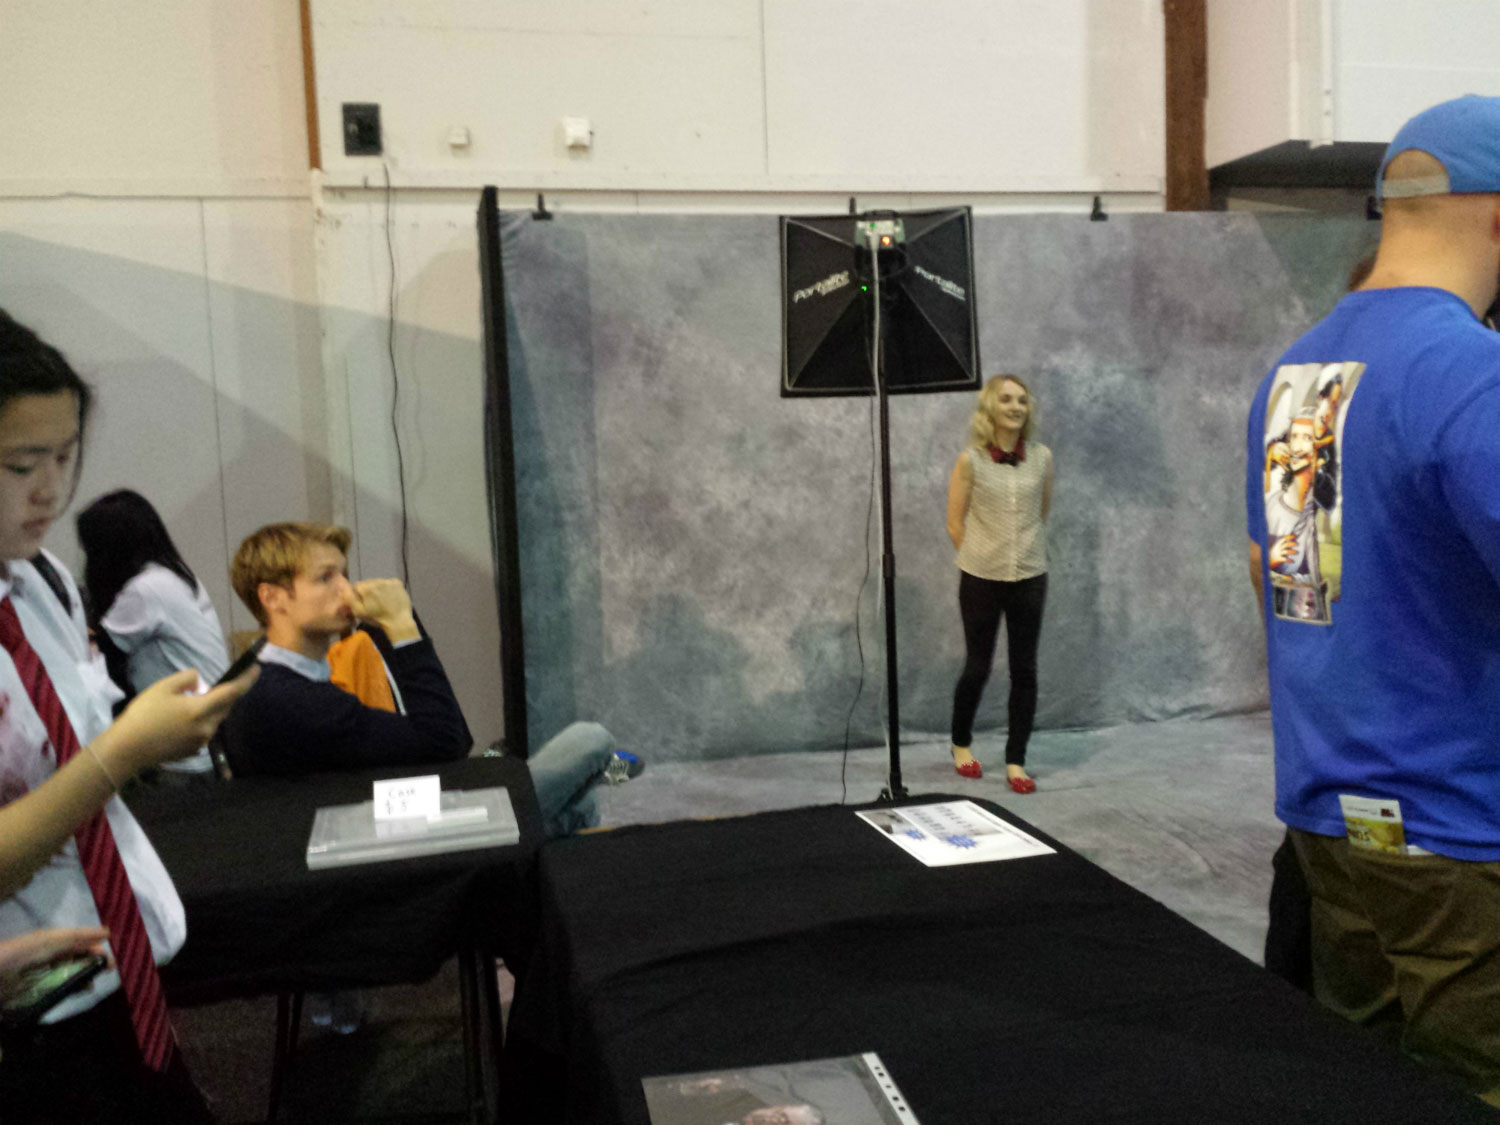 Armageddon Expo 2013 Auckland – Oct 27 – Evanna Lynch Photo Session – 1 (Photo credit: Tracey Wong)